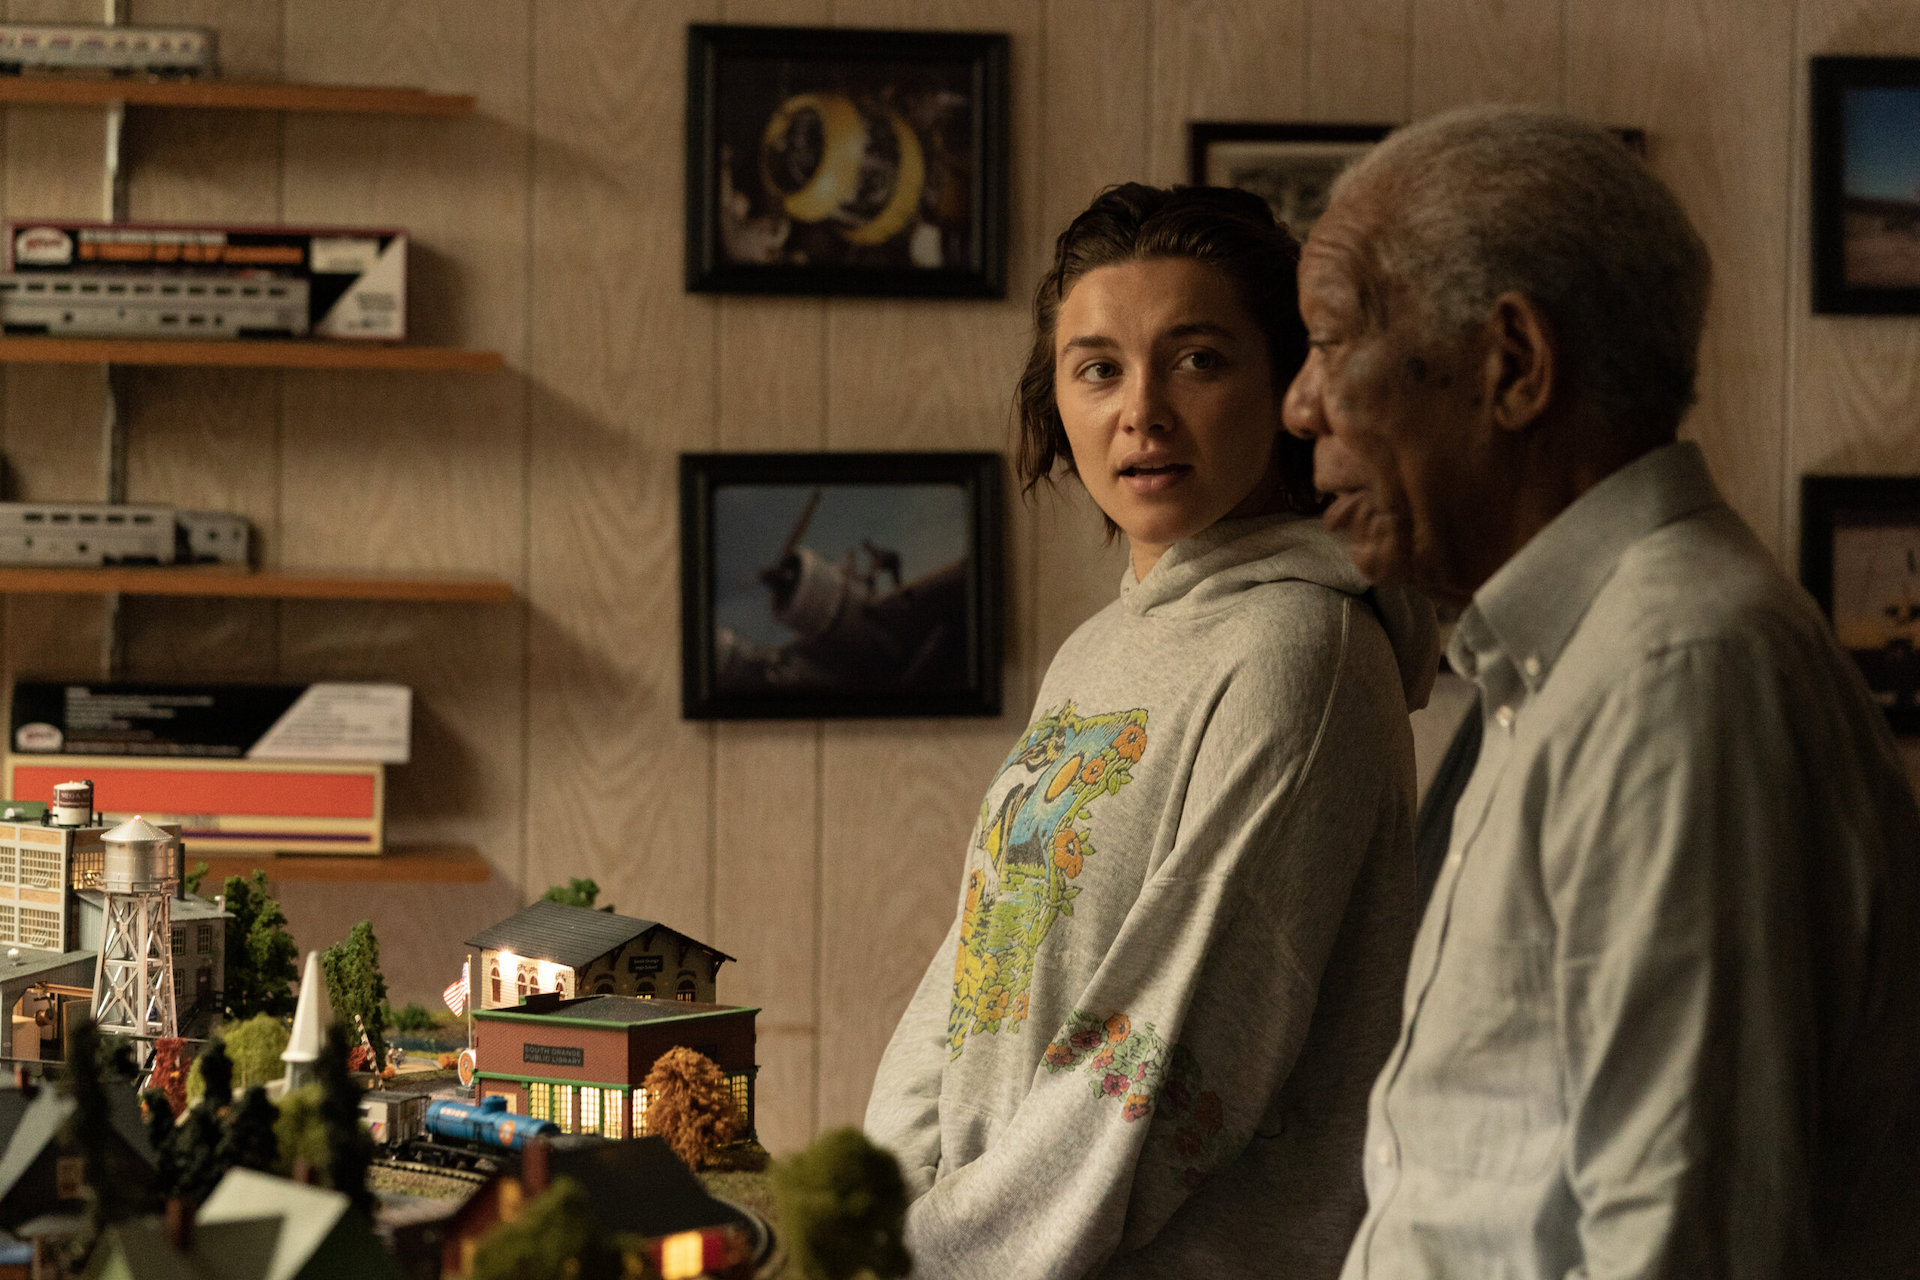 'A Good Person' will be starring the Academy Award nominee Florence Pugh and Academy Award winner Morgan Freeman. Look out for this movie in select theaters on March 24, and everywhere else on March 31.

